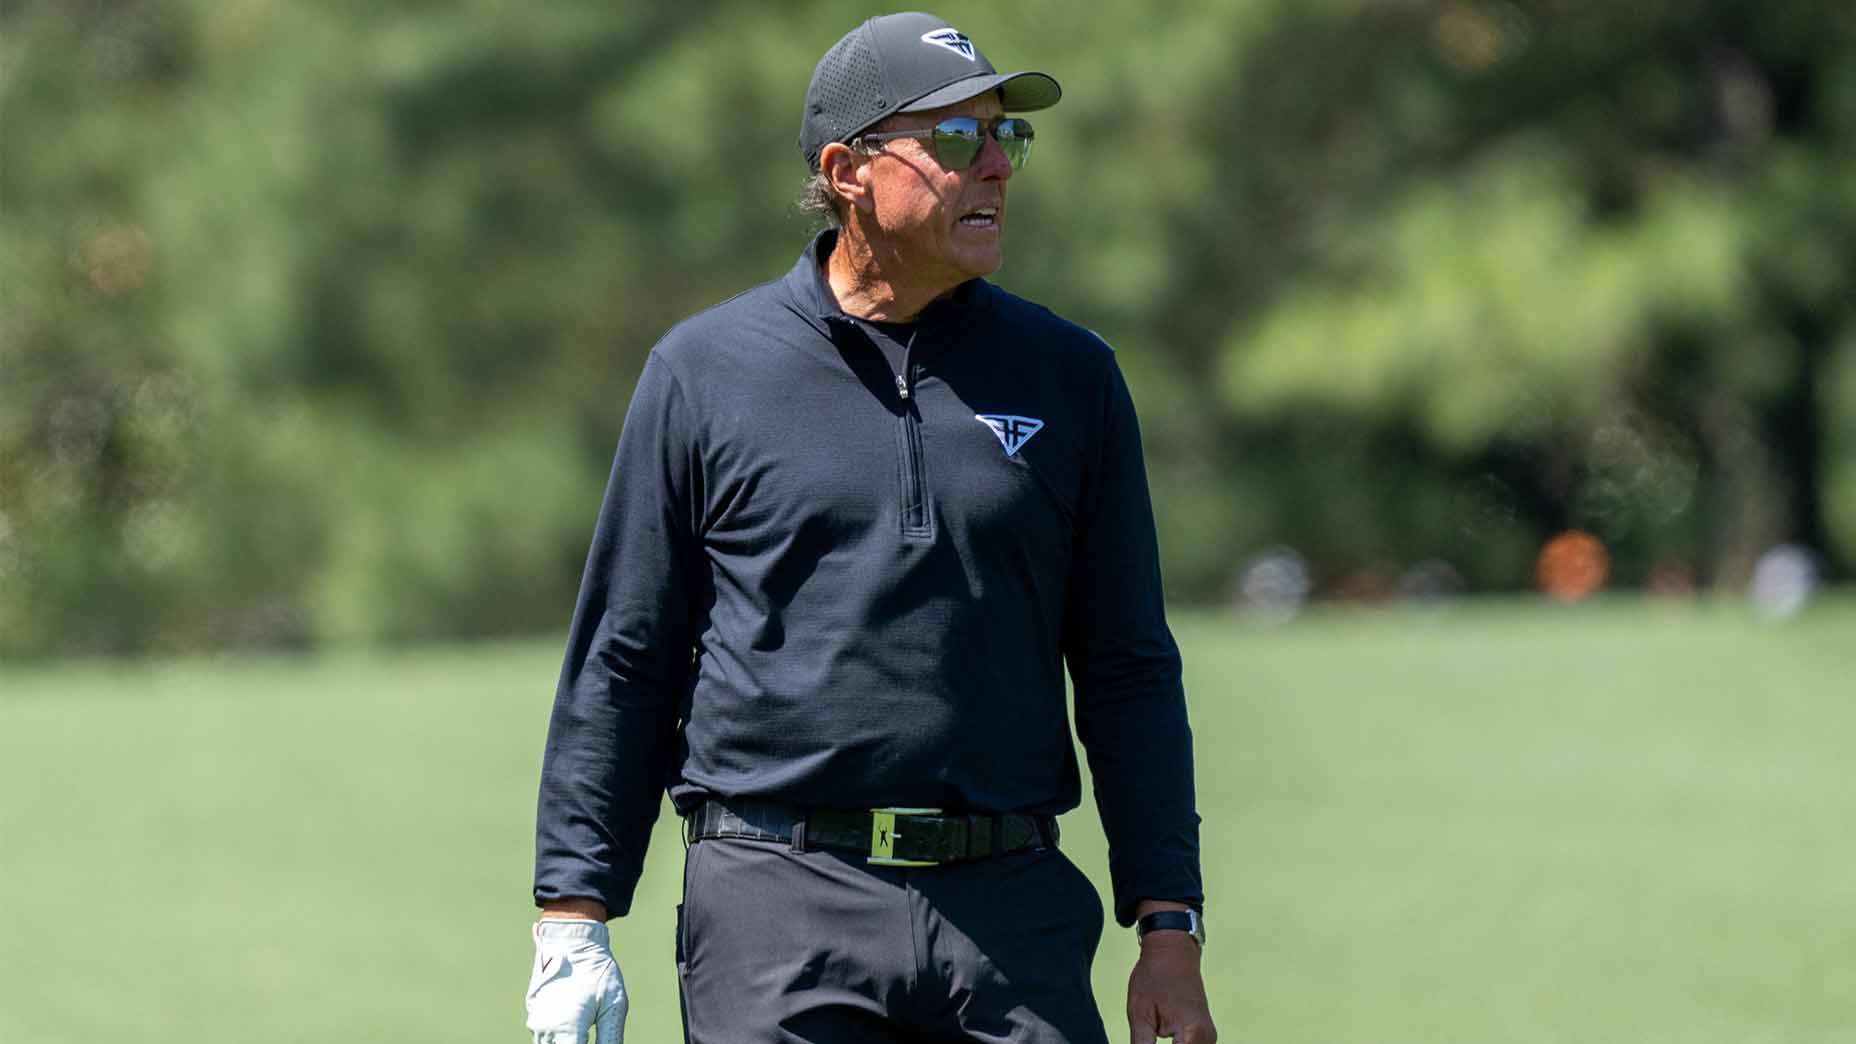 In a stunning Masters performance, Phil Mickelson glimpses into the